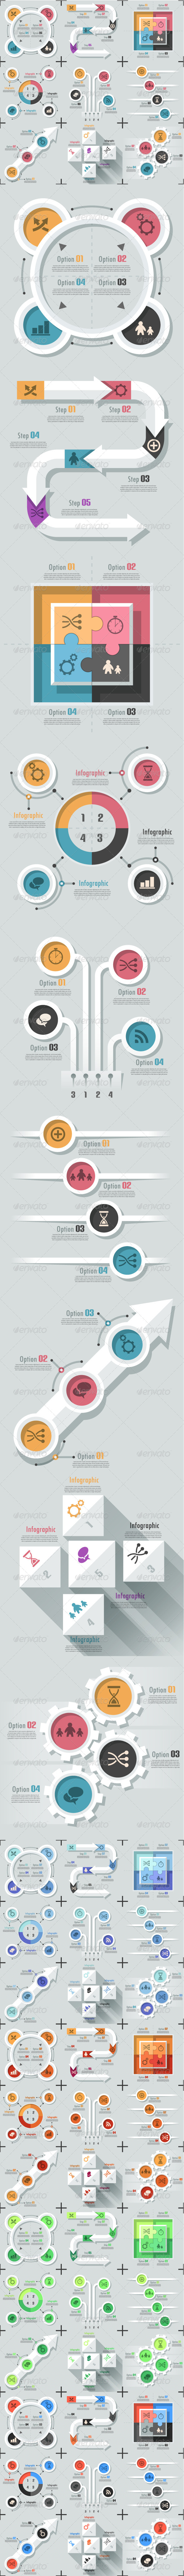 Set Of 9 Flat Infographic Options Templates - Infographics 